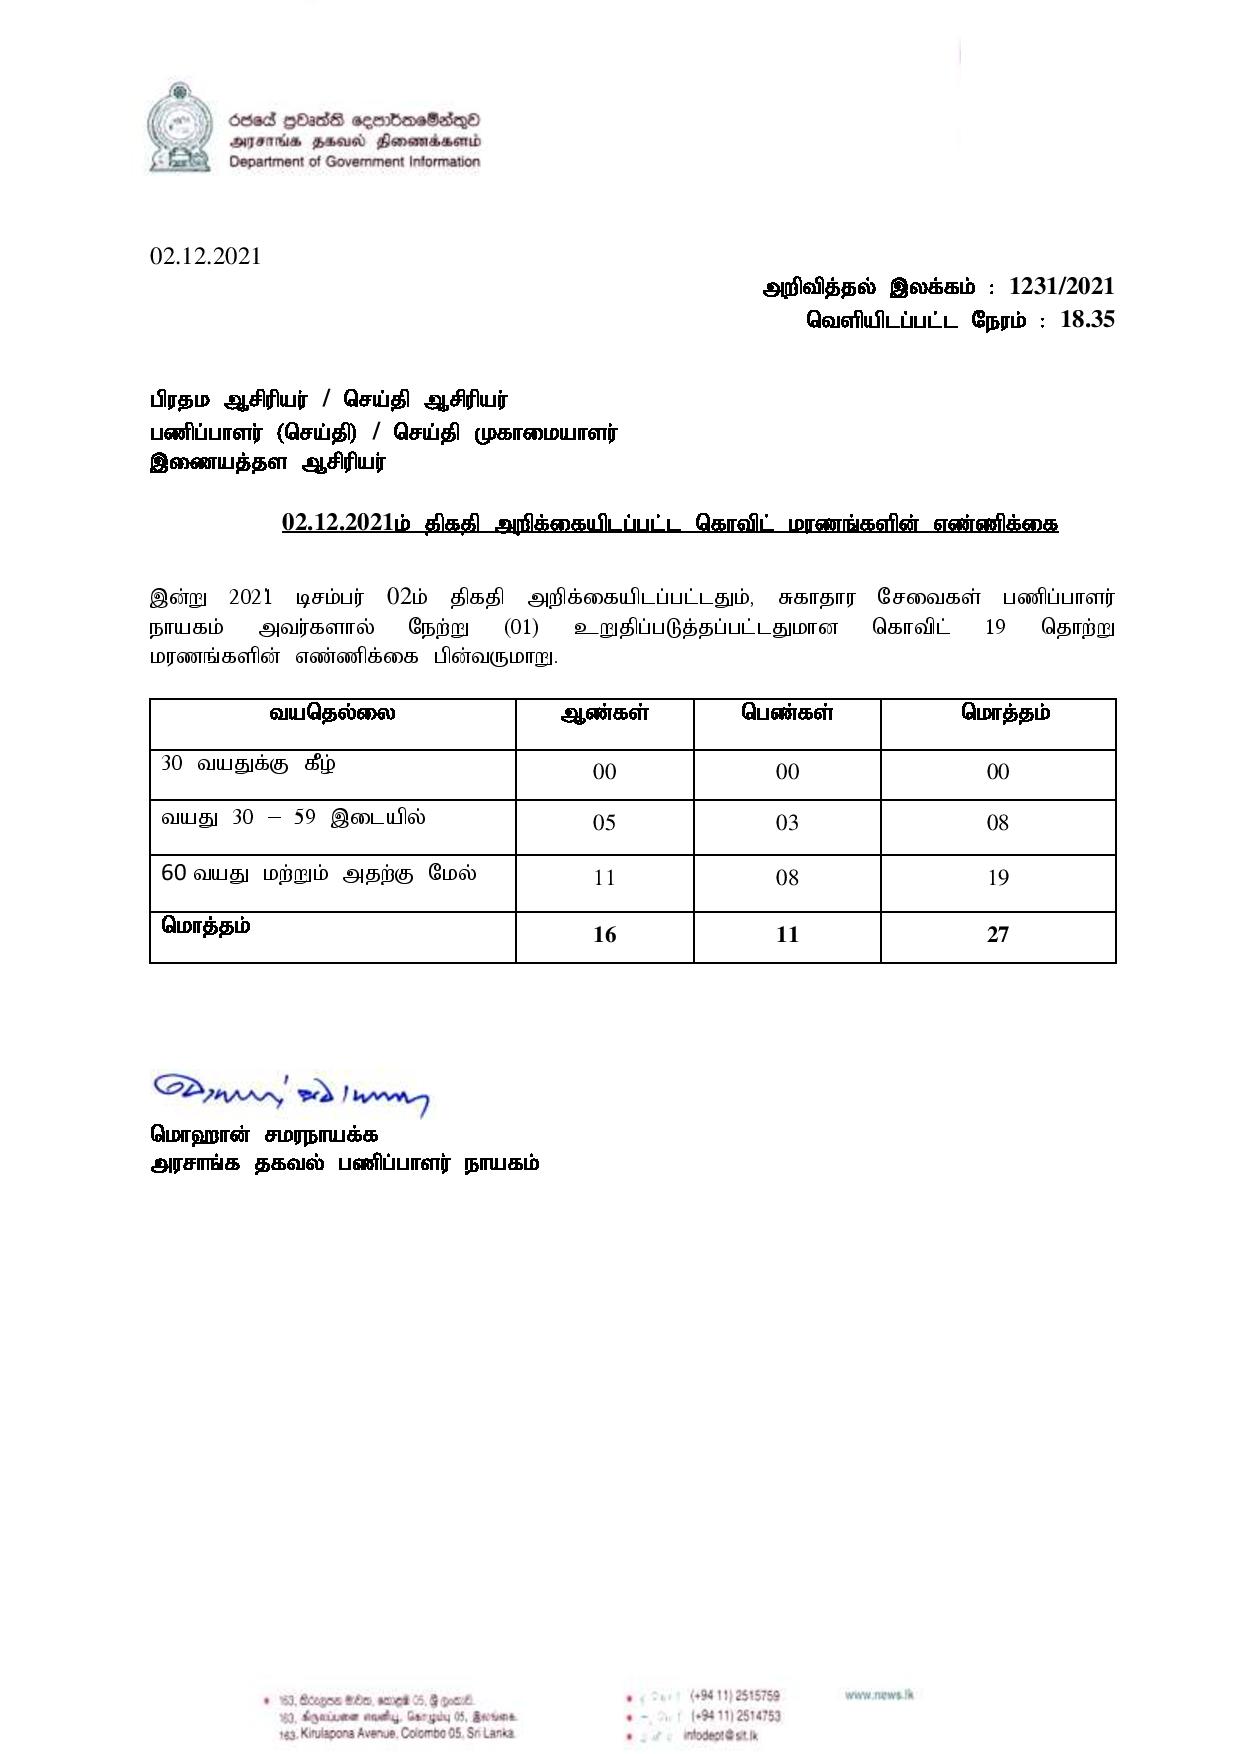 Release No 1231 Tamil page 001